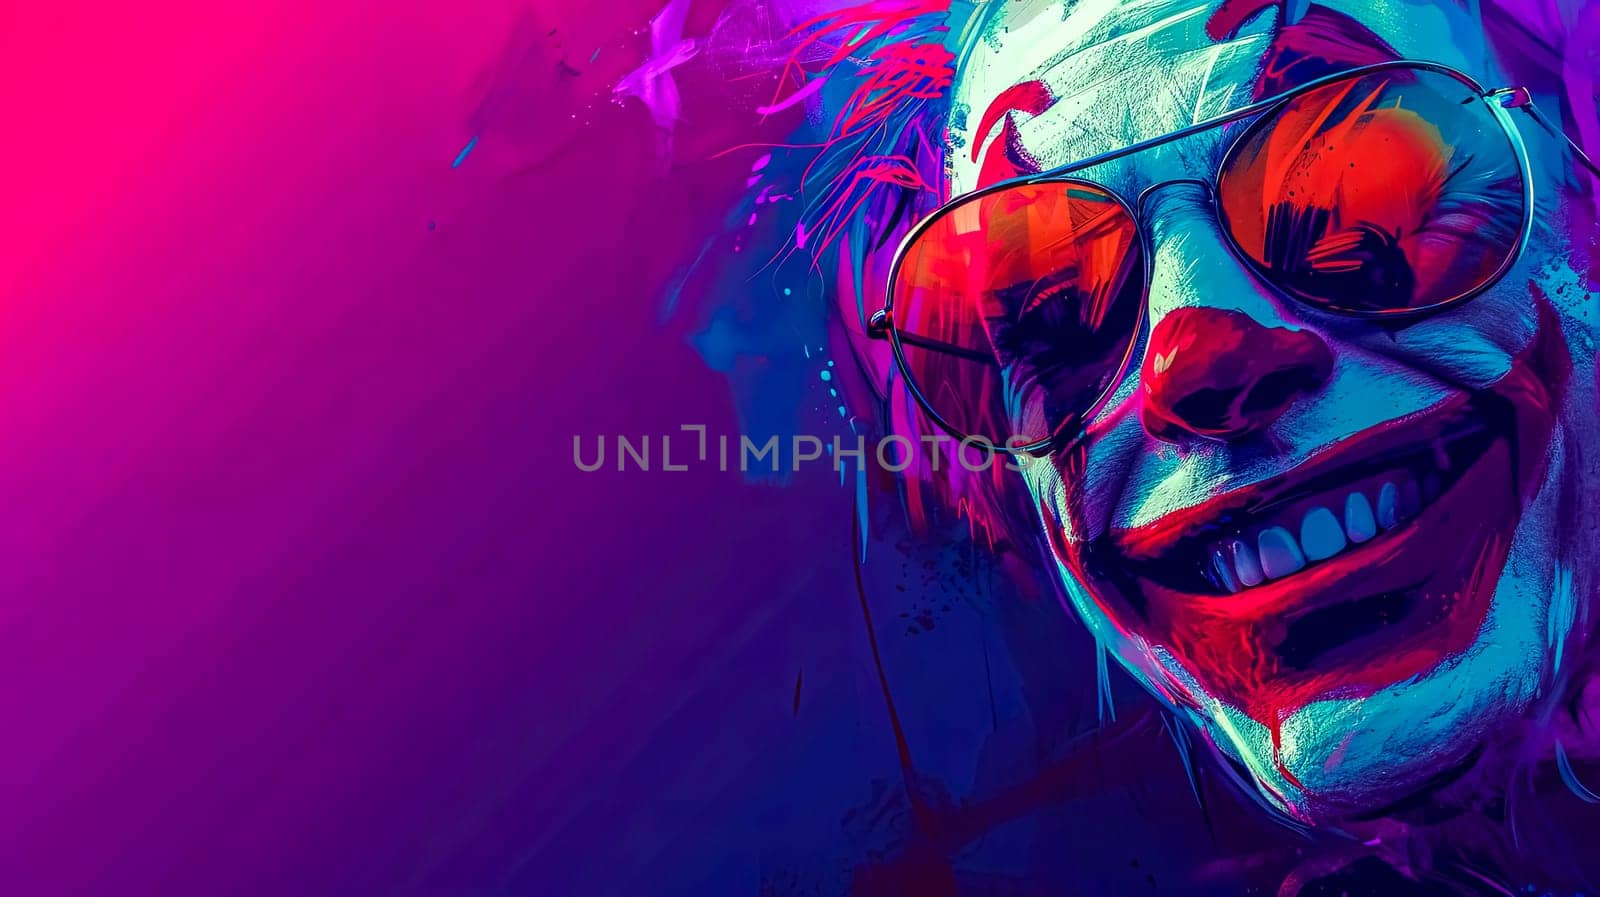 A neon-drenched, psychedelic portrait of a person wearing sunglasses, reflecting a vivid explosion of colors on a striking purple background. by Edophoto